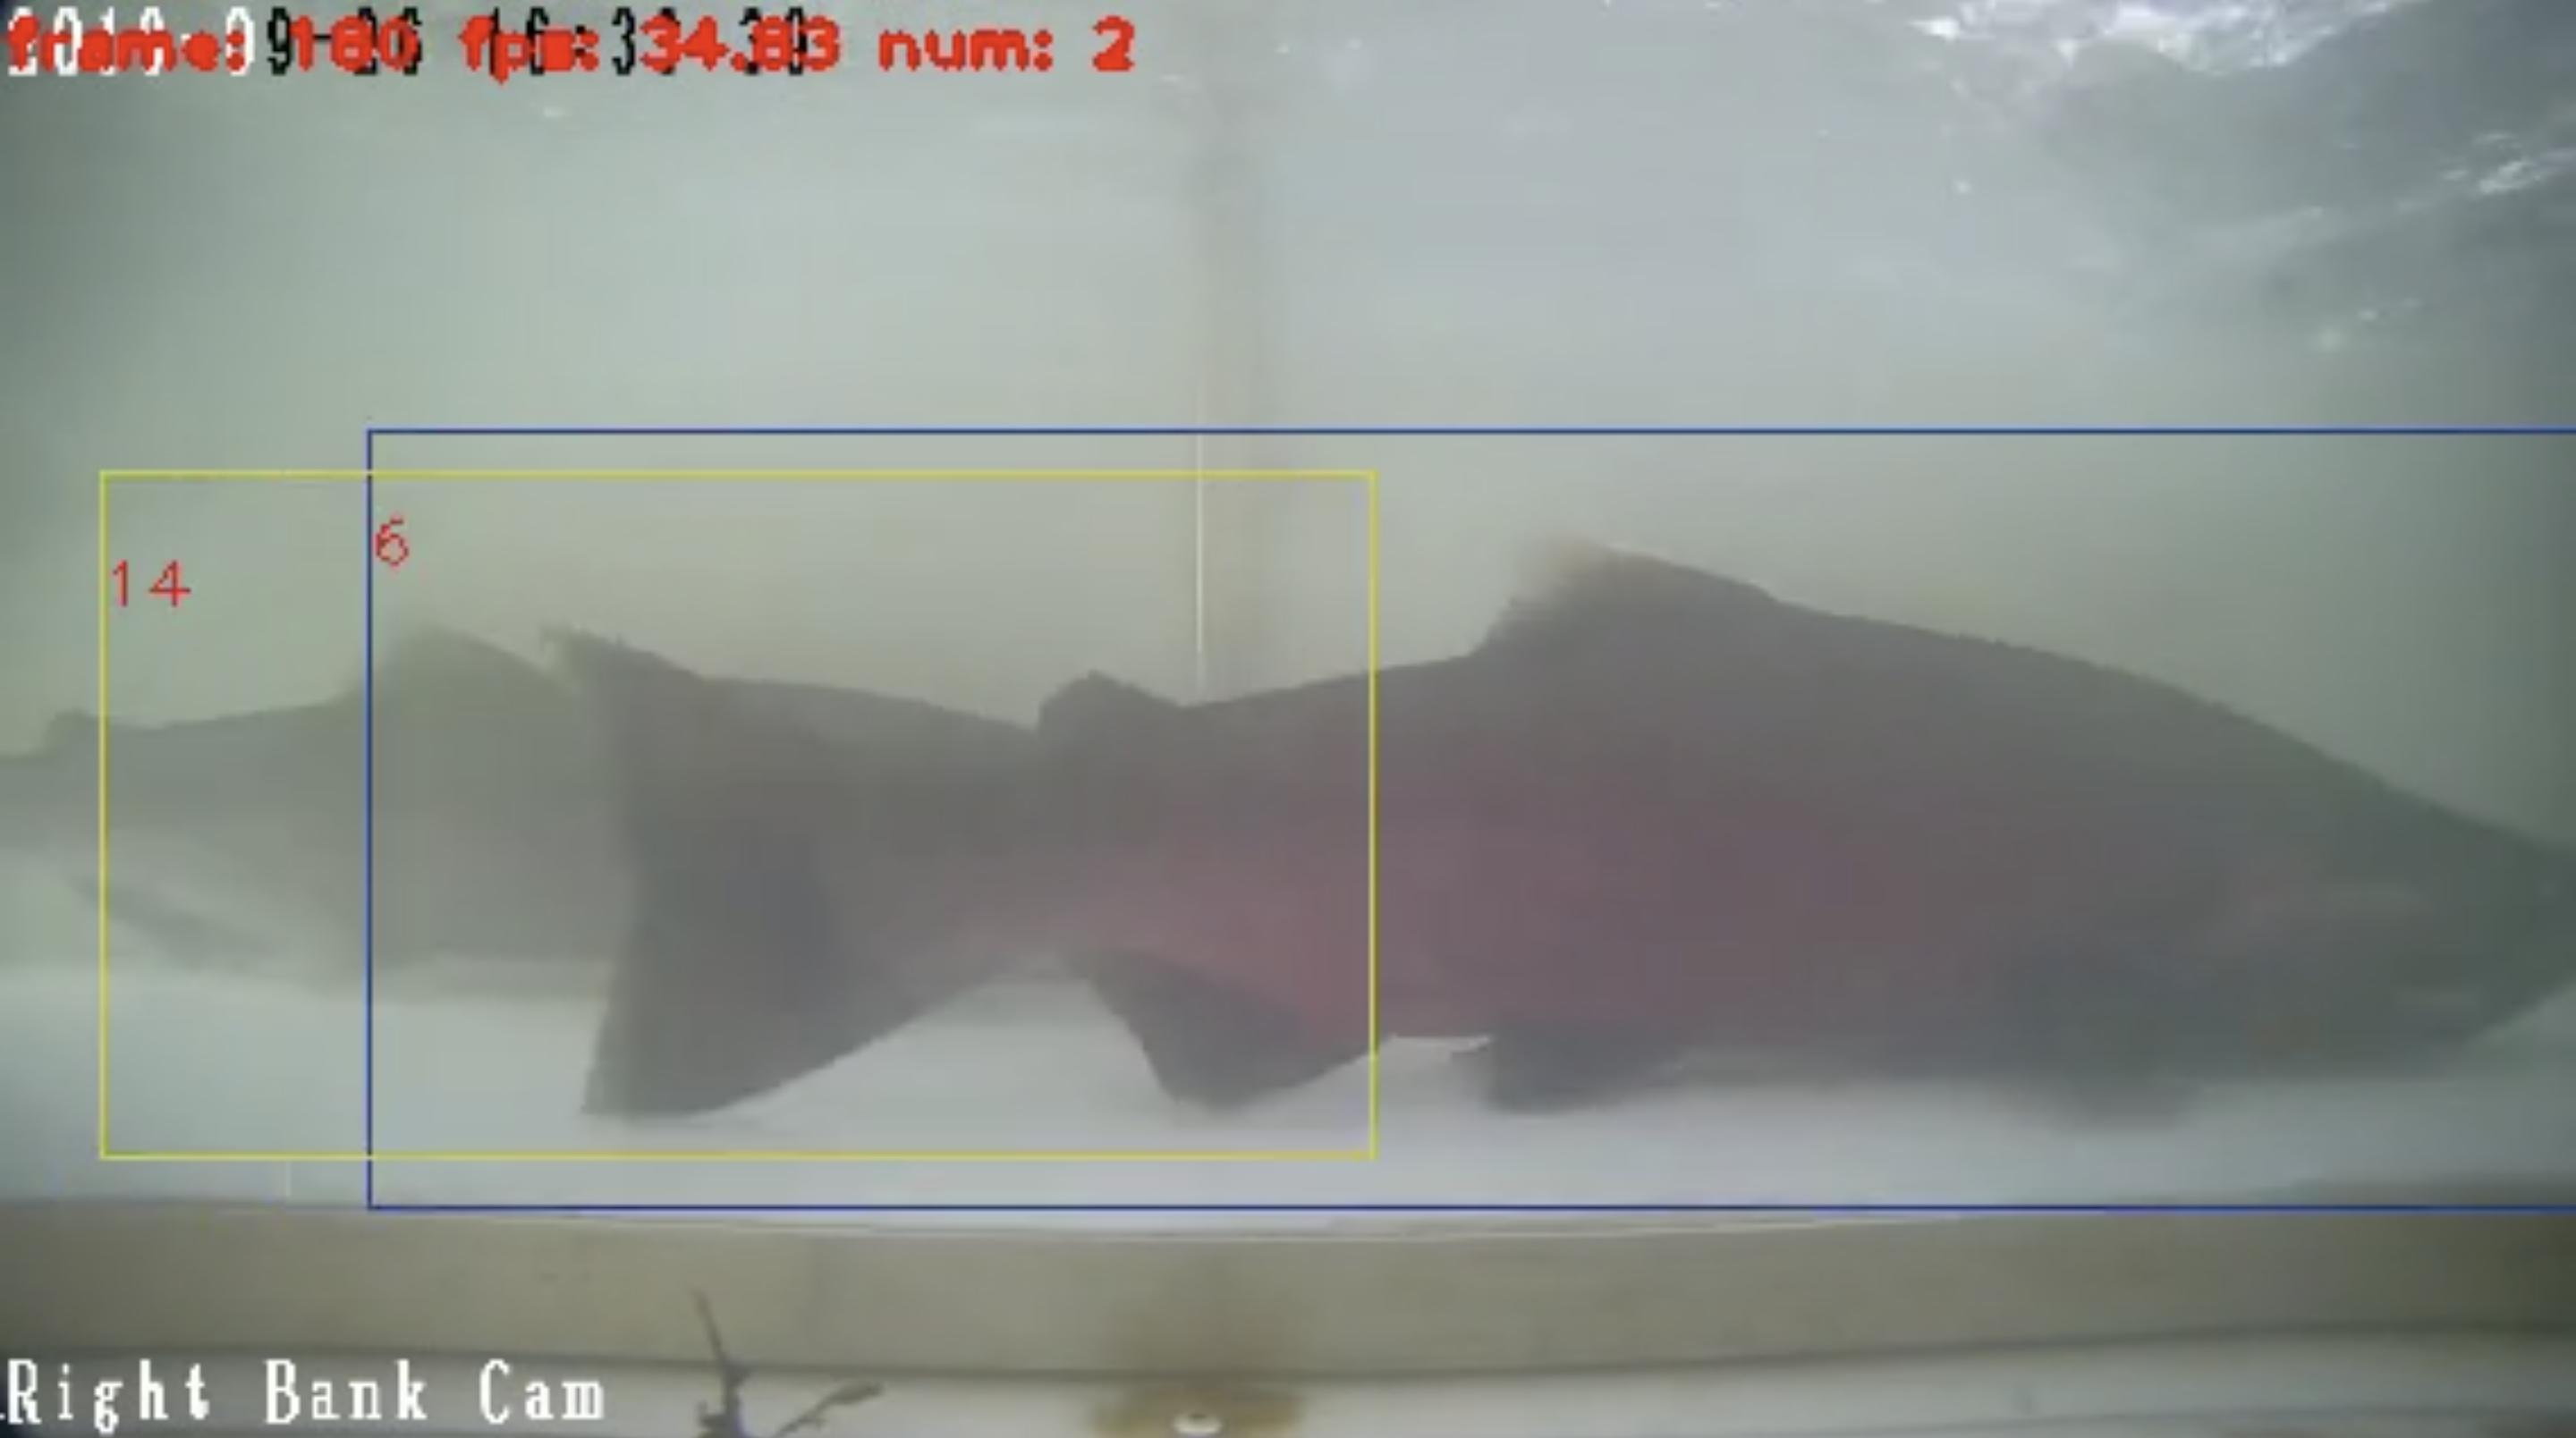 Still from the video system showing the computer system identifying and counting salmon species passing through the box (weir openings) during training and learning. Video courtesy of Will Atlas.